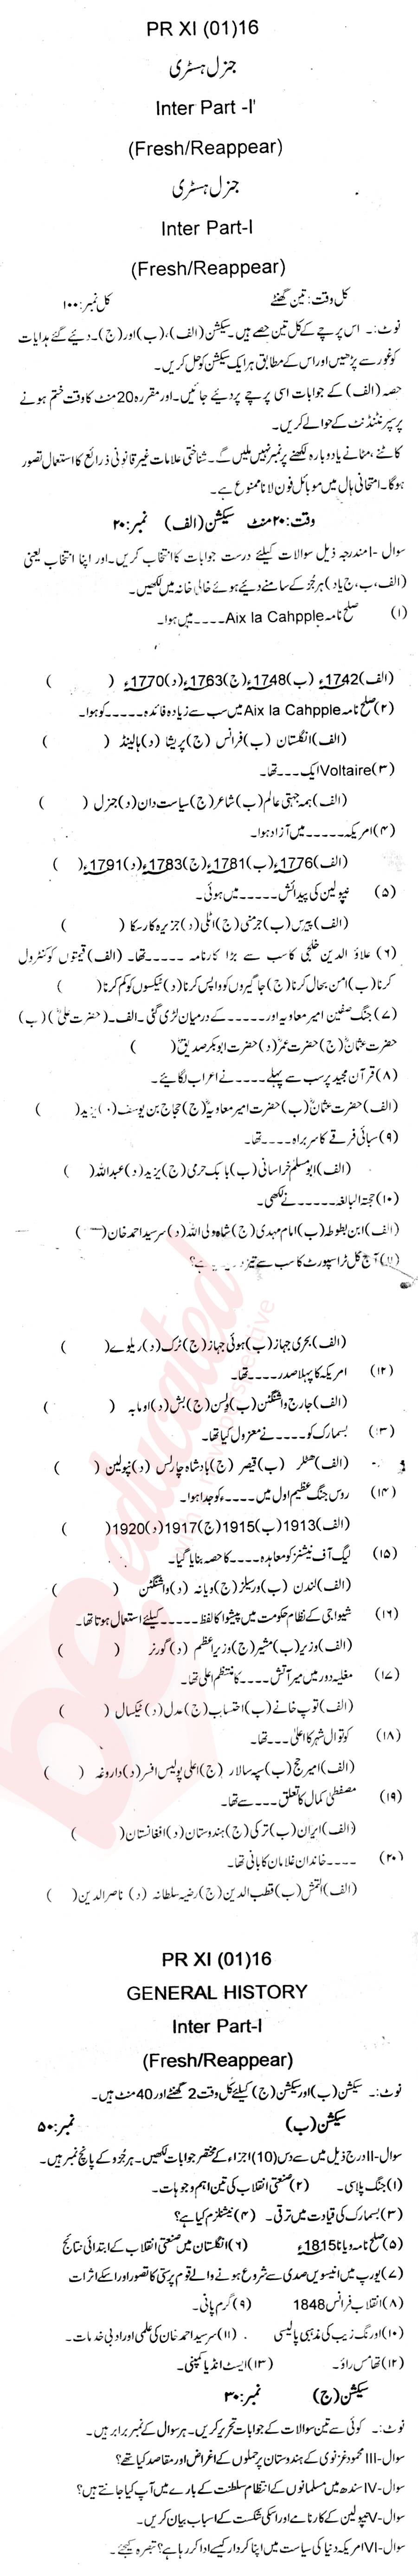 Islamic History FA Part 1 Past Paper Group 1 BISE Swat 2015